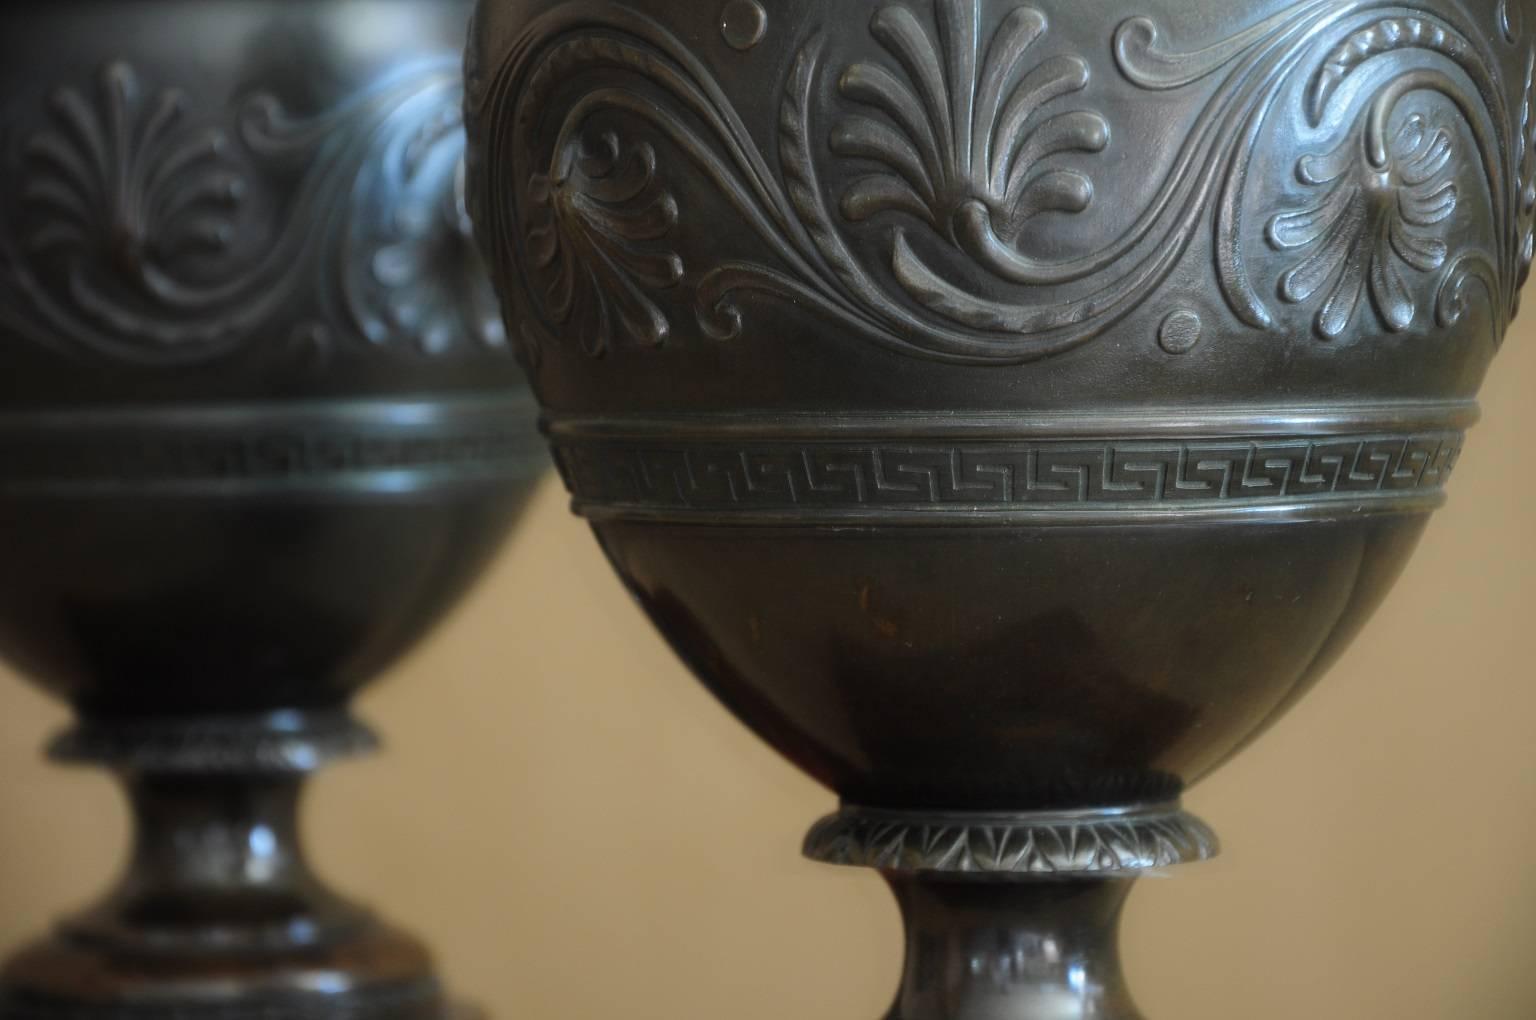 Lovely pair of 19th century bronze urns on a original marble base. The vegetal motives, meanders and lobbed moulding are typical of the Classic revival period. Beautiful detail are the serpents handles which complement the elegant curves.